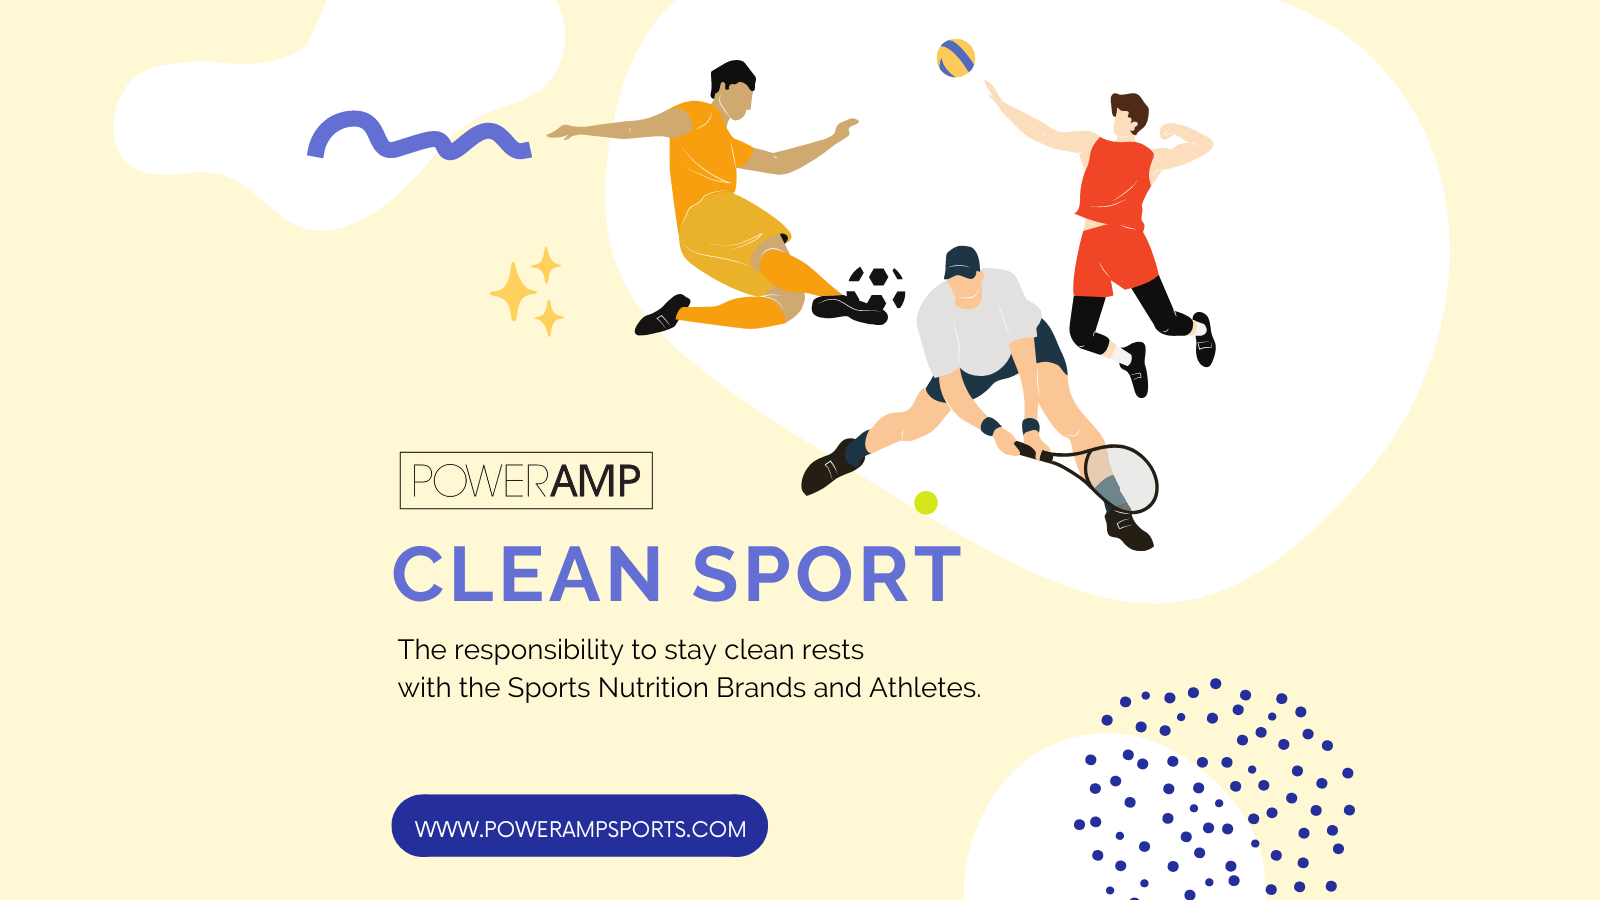 Clean Sport: The responsibility to stay clean rests with the Sports Nutrition Brands and Athletes